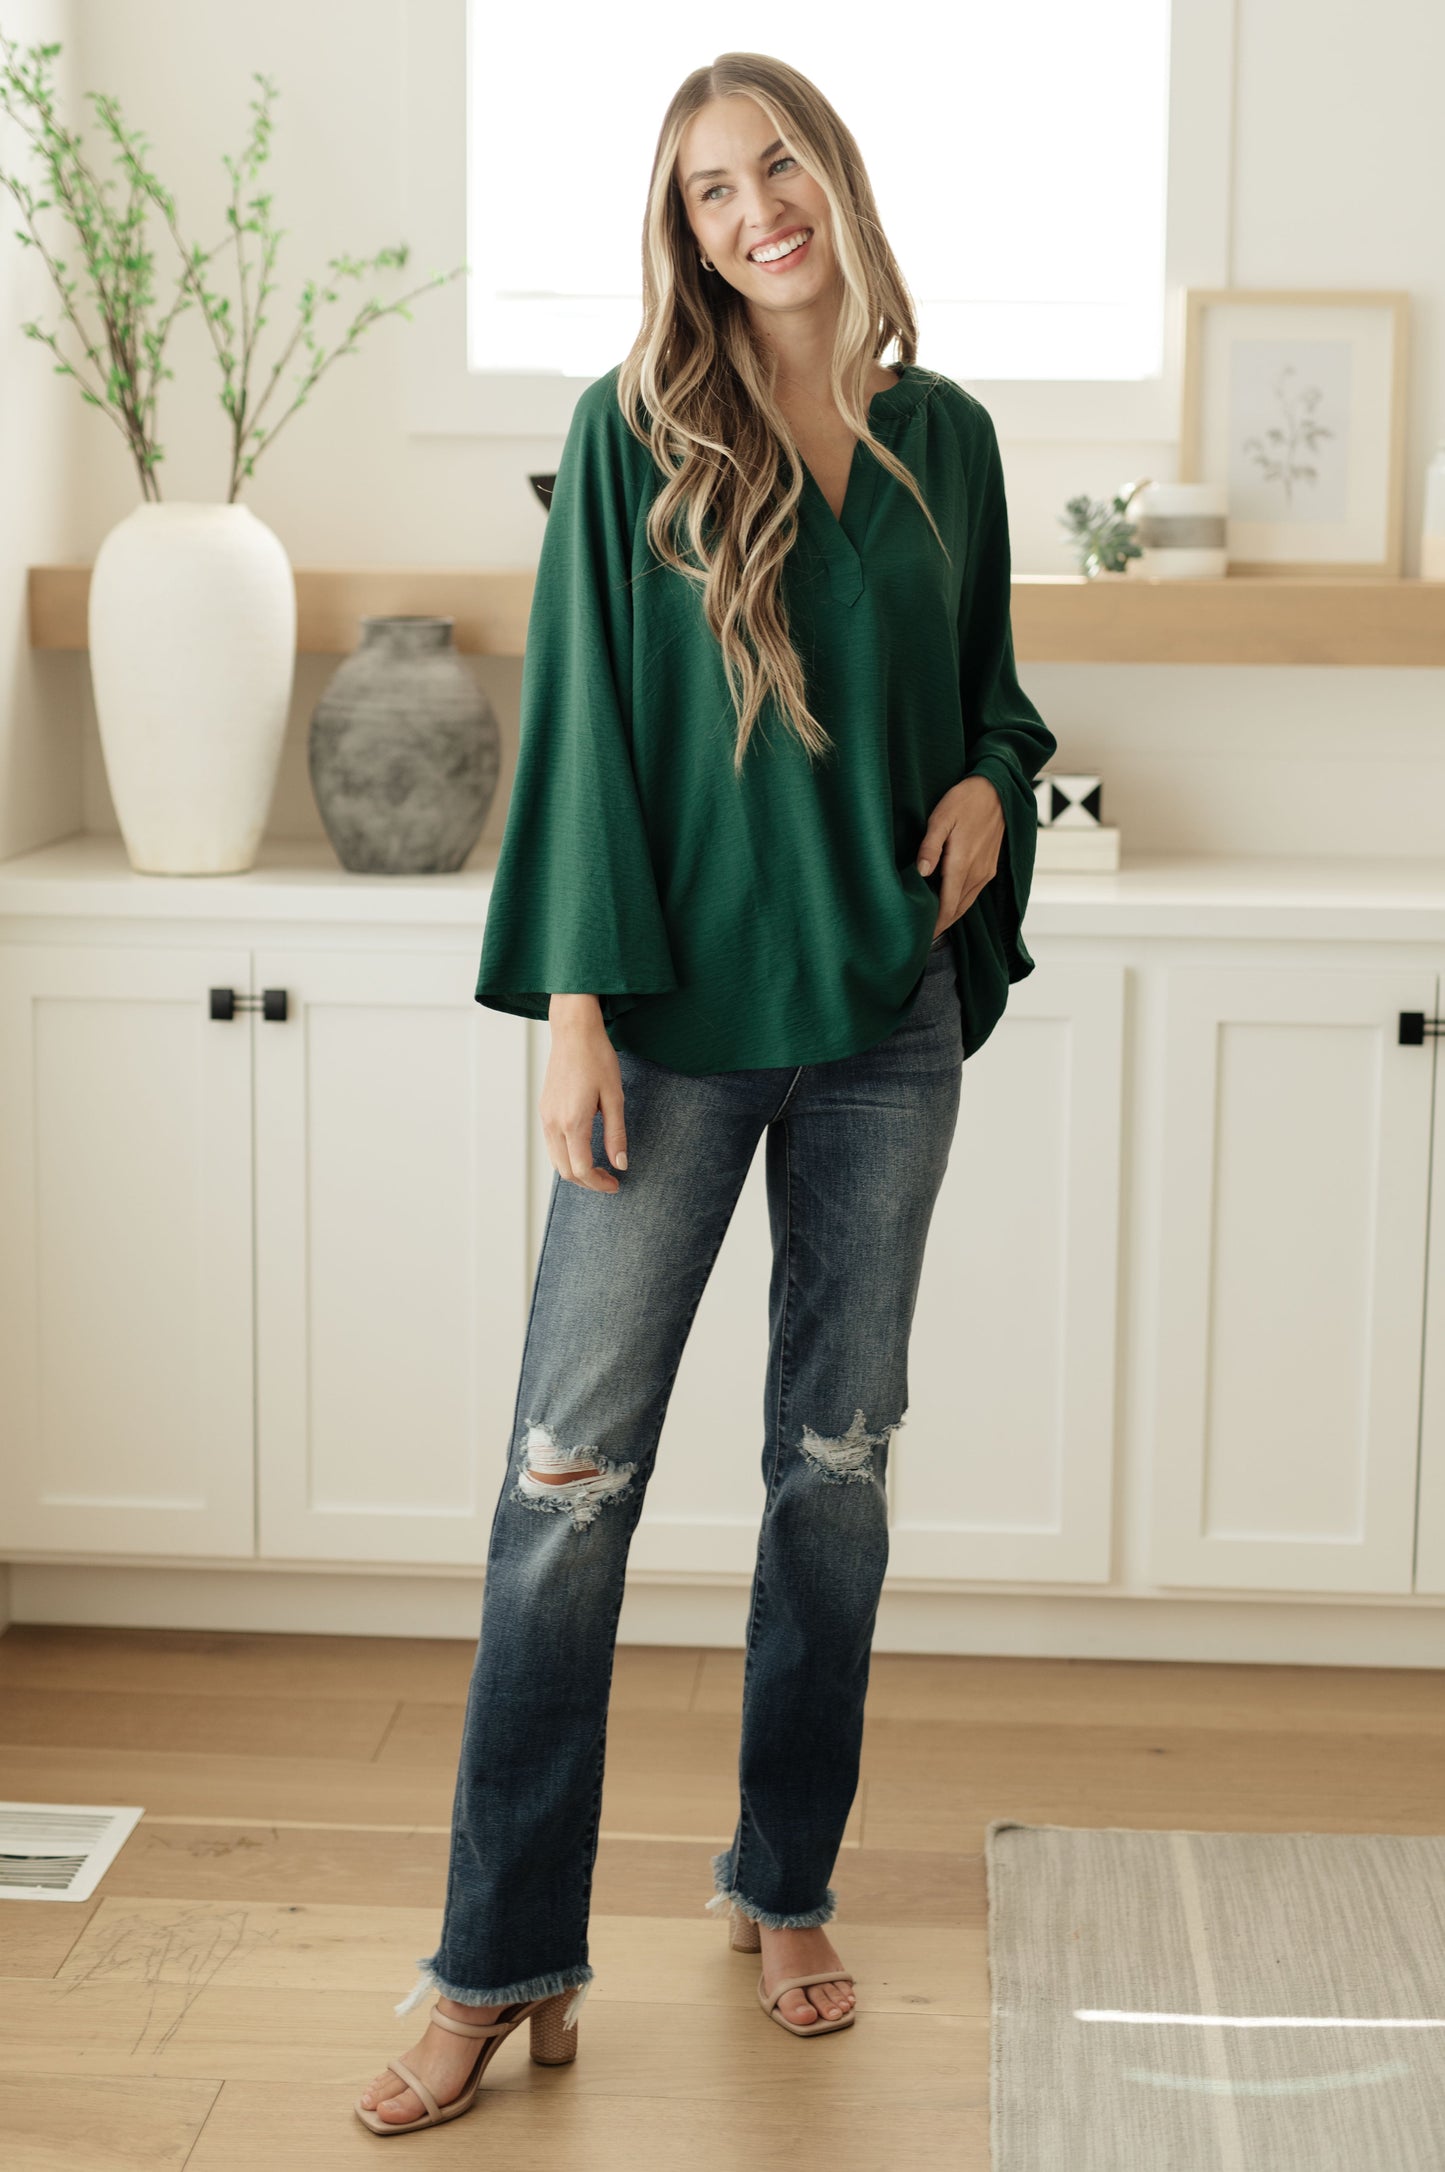 Climb On V-Neck Blouse in Forest Green